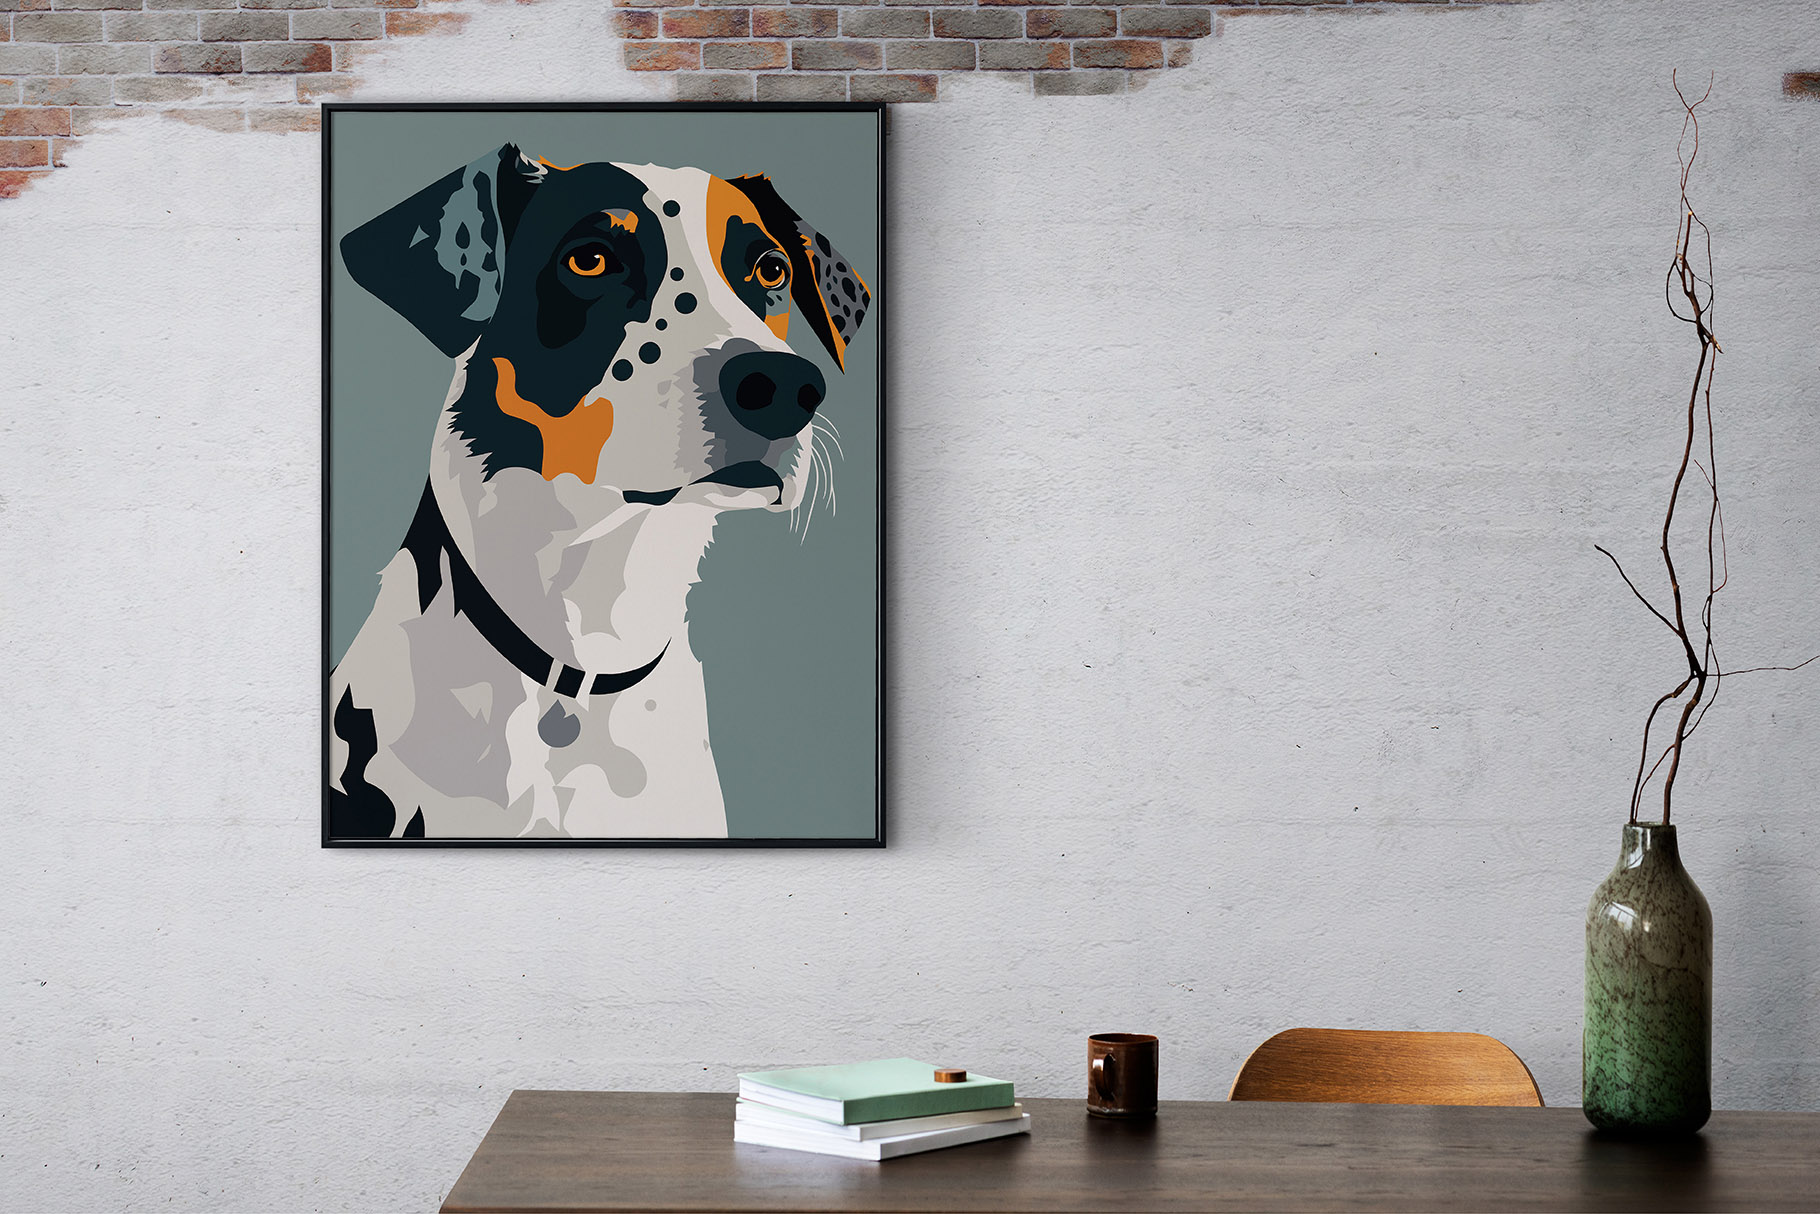 Picture of a dog on a wall above a table.